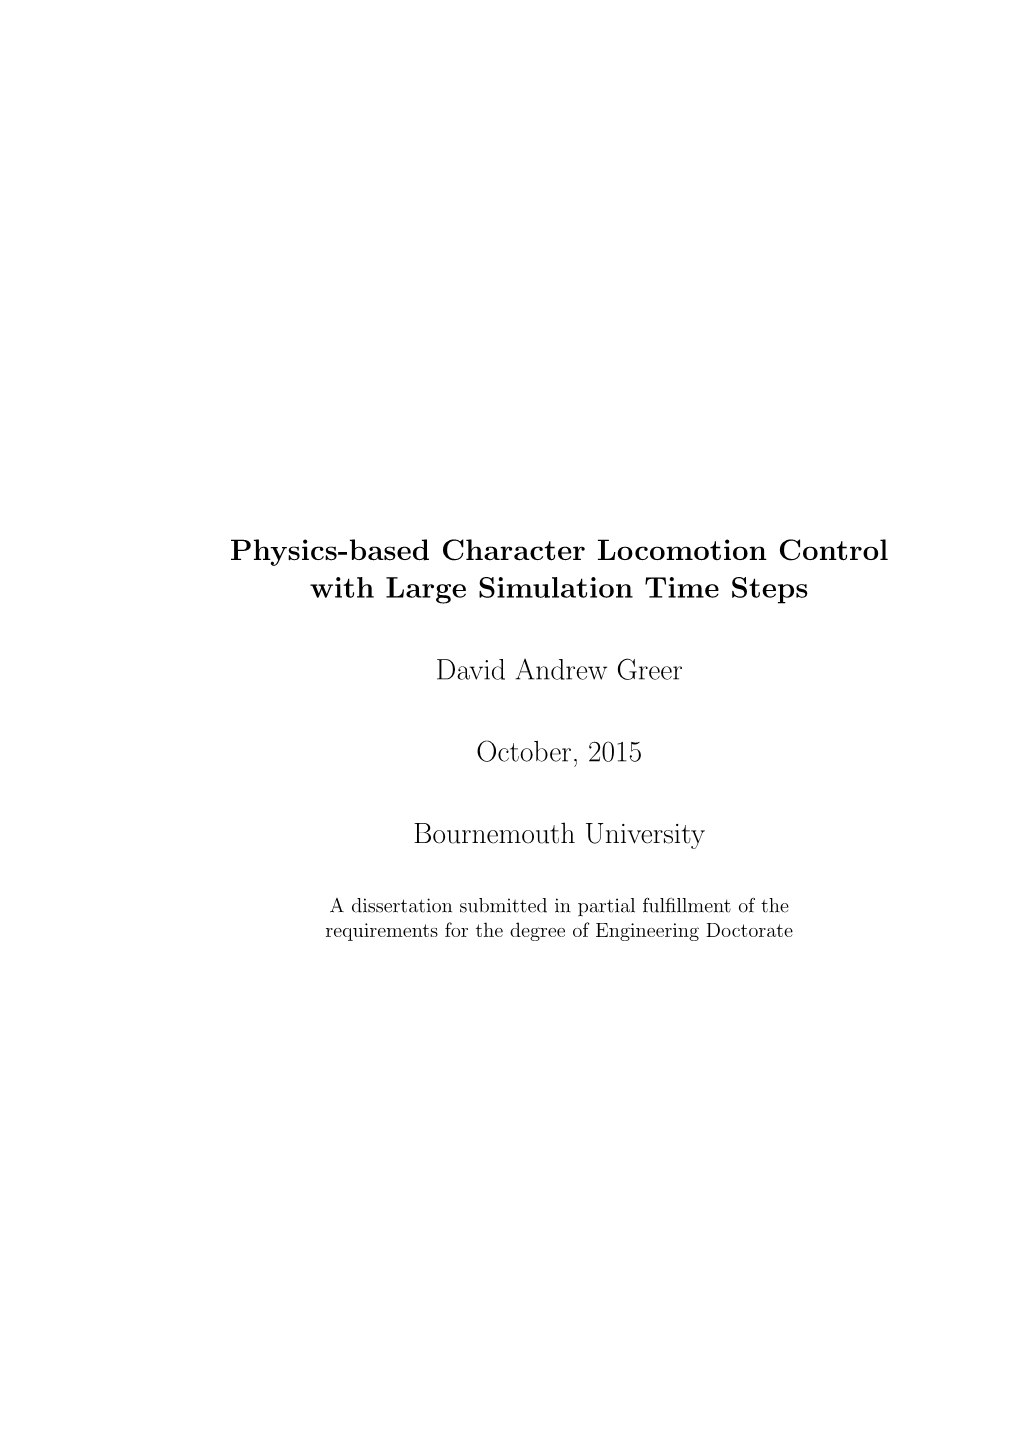 Physics-Based Character Locomotion Control with Large Simulation Time Steps